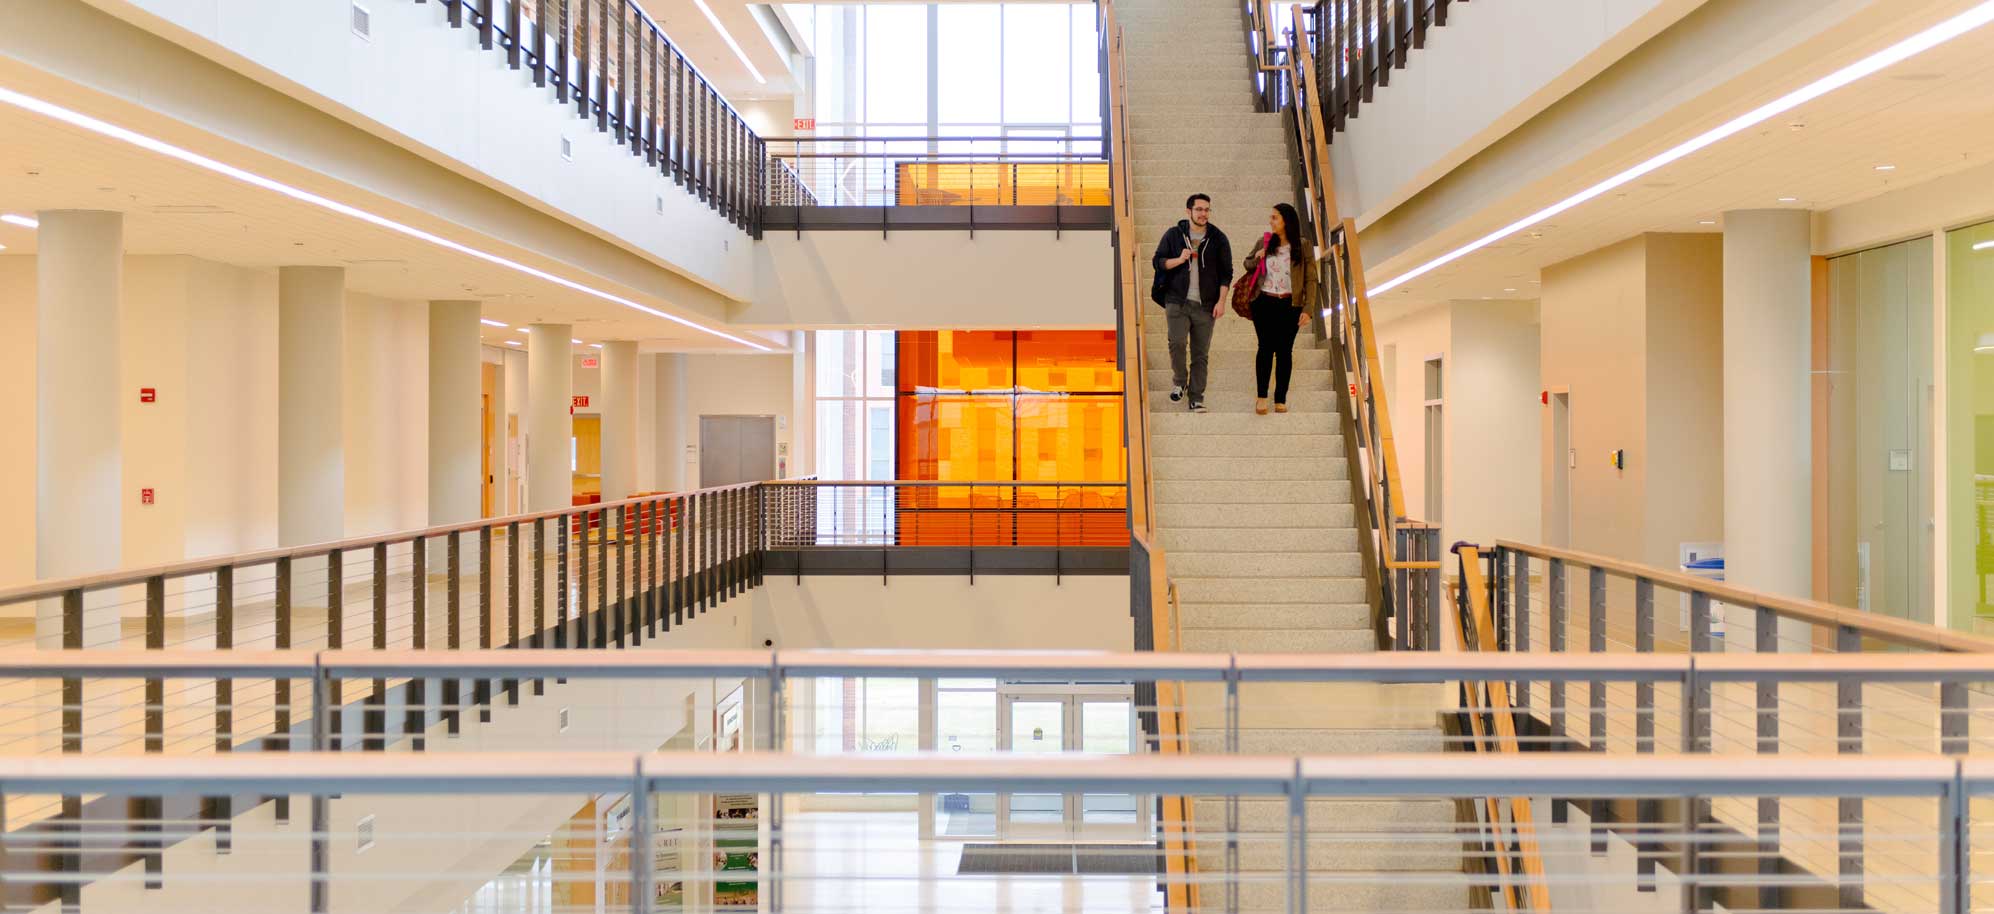 Two people walking down an open staircase